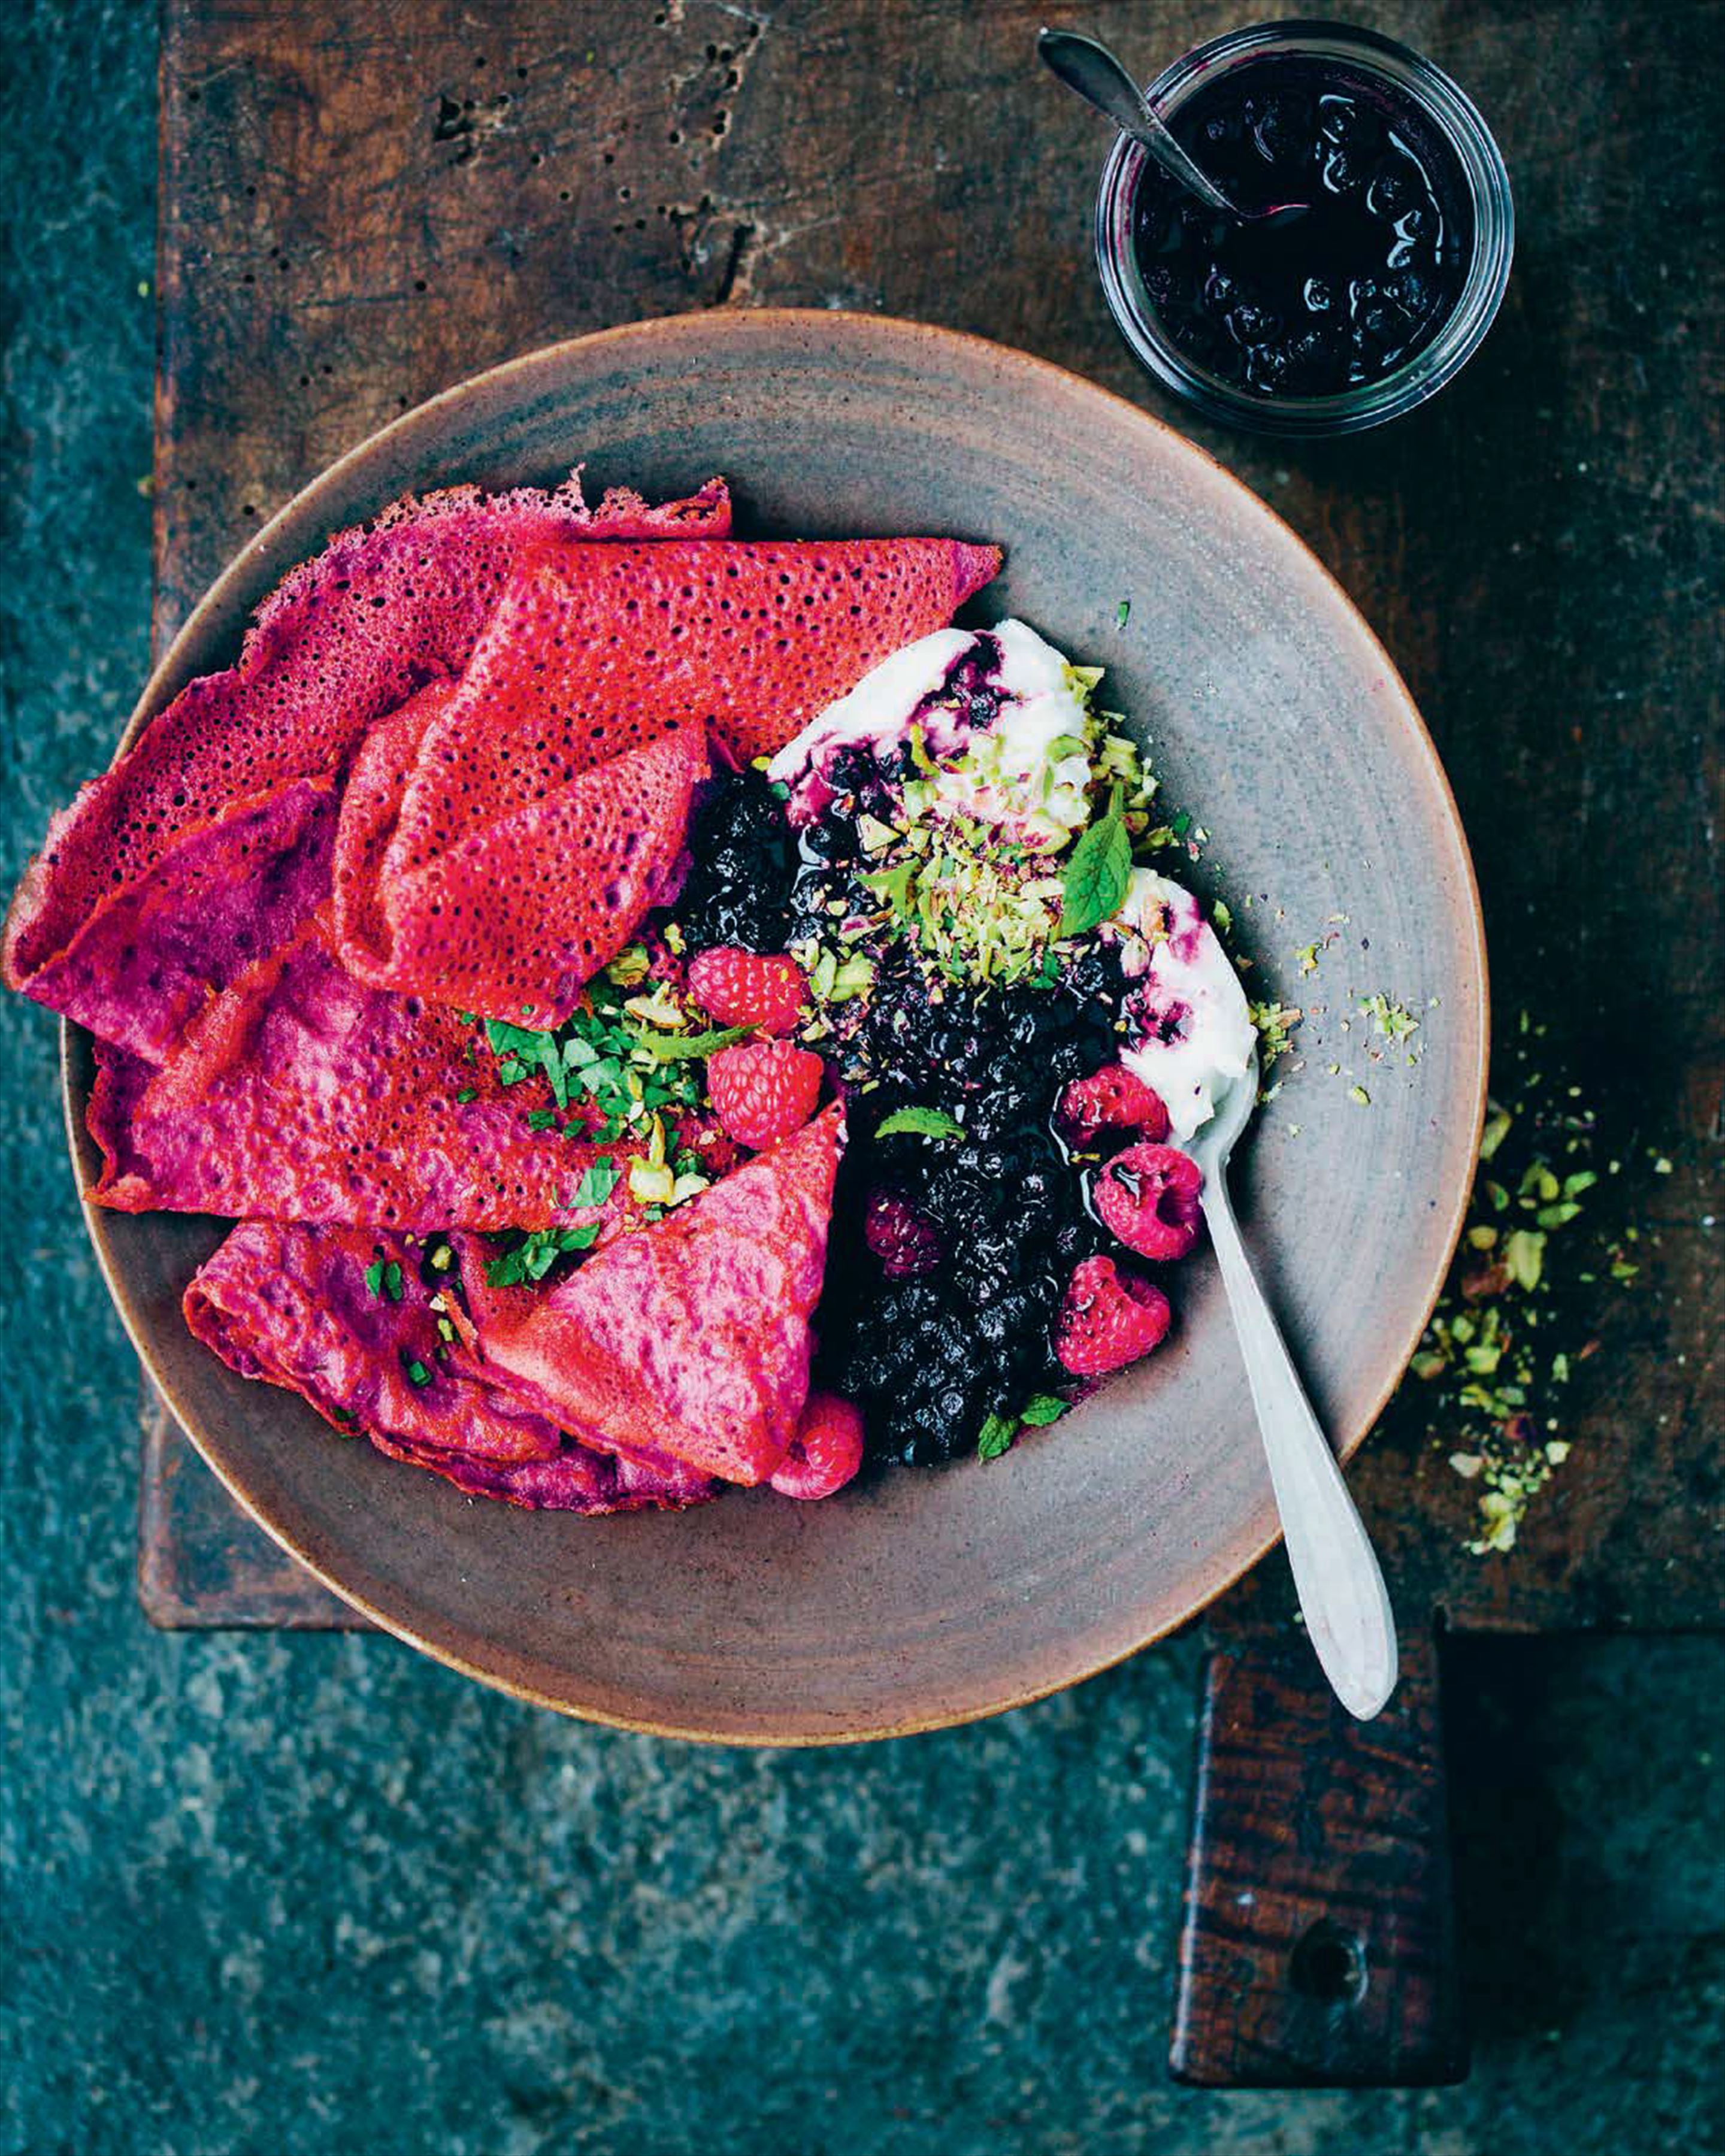 Beetroot crepes with warm blueberry compote and yoghurt